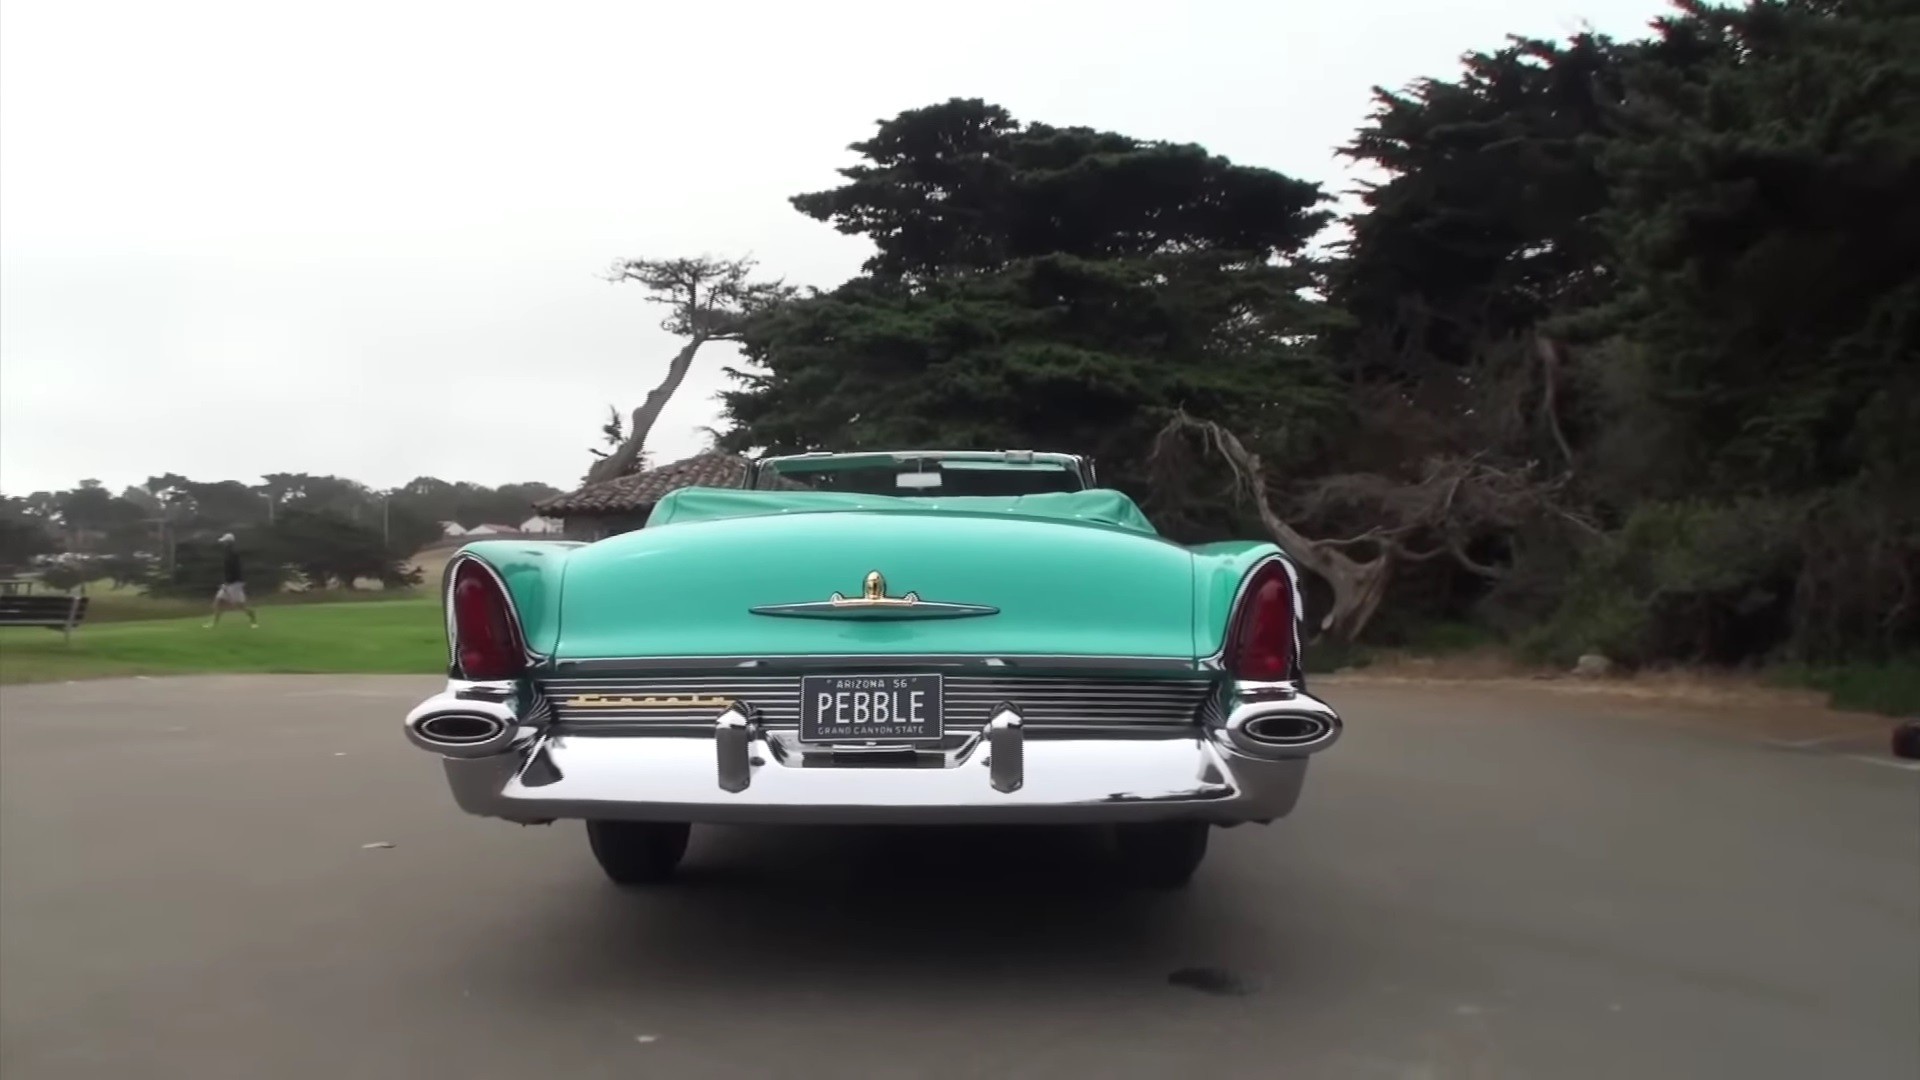 One 1956 Lincoln Premiere Is a Rare, Cool-Adorned Classic Clad